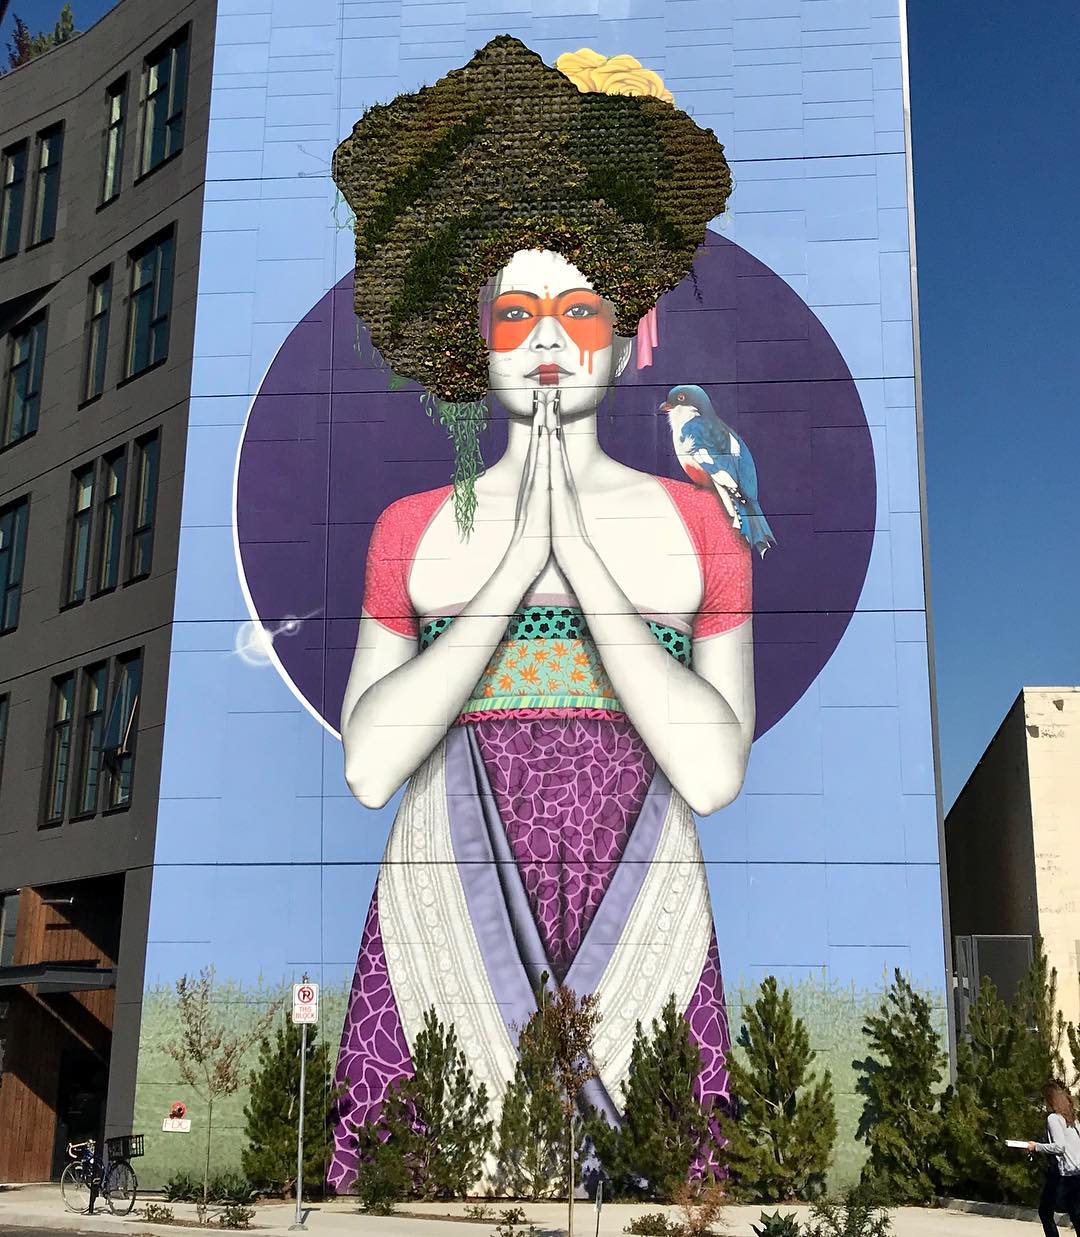 Large mural of a woman on the side of a building in Portland photo by Instagram user @thealaskabarbie